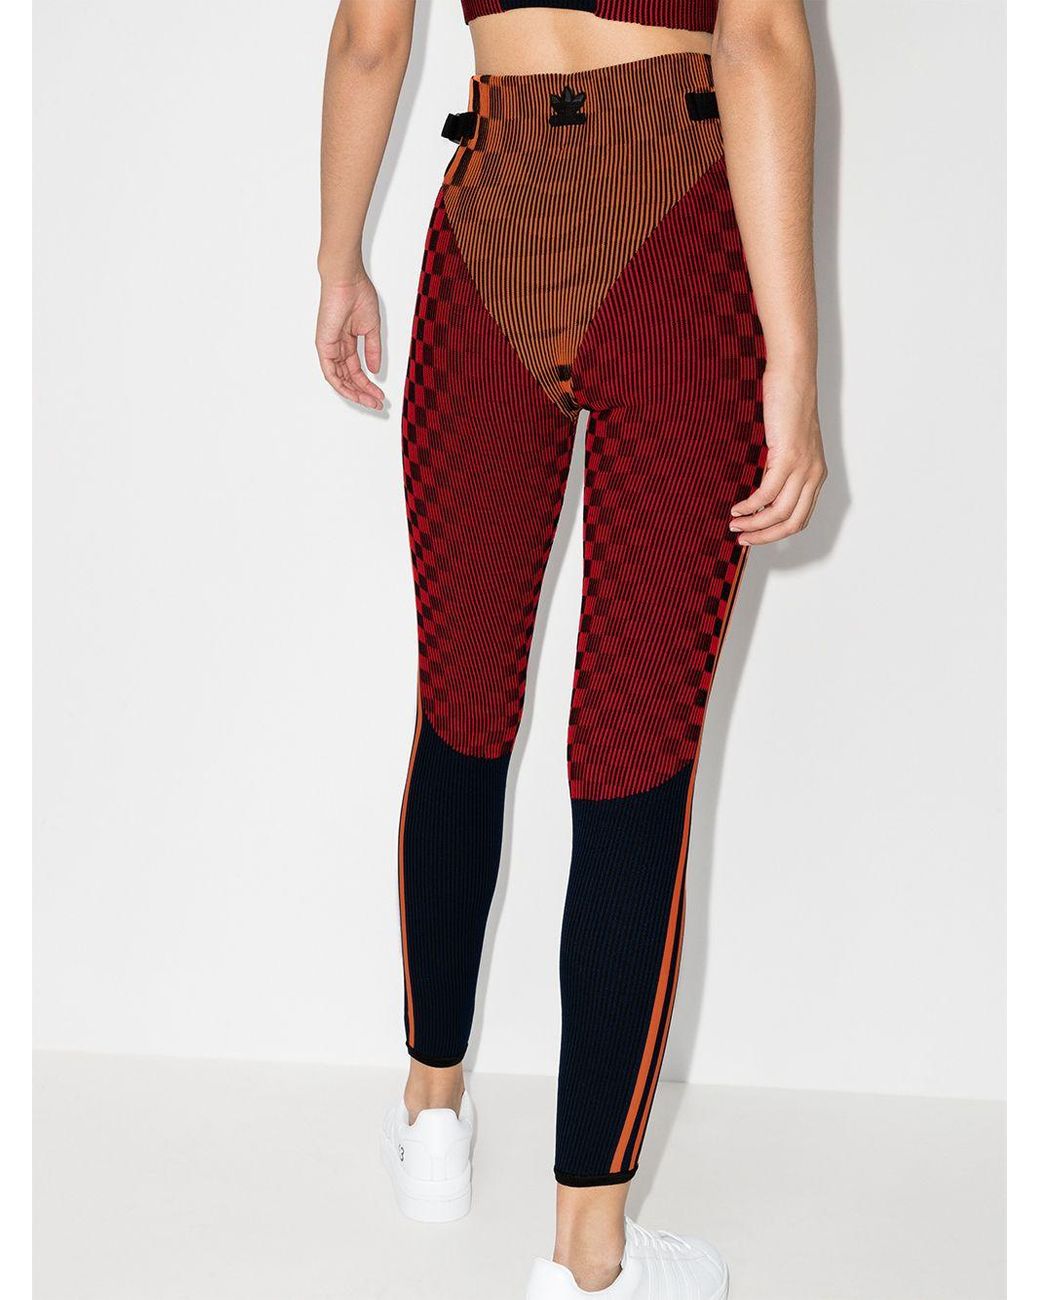 adidas Cotton X Paolina Russo Panelled leggings in Red (Orange) | Lyst